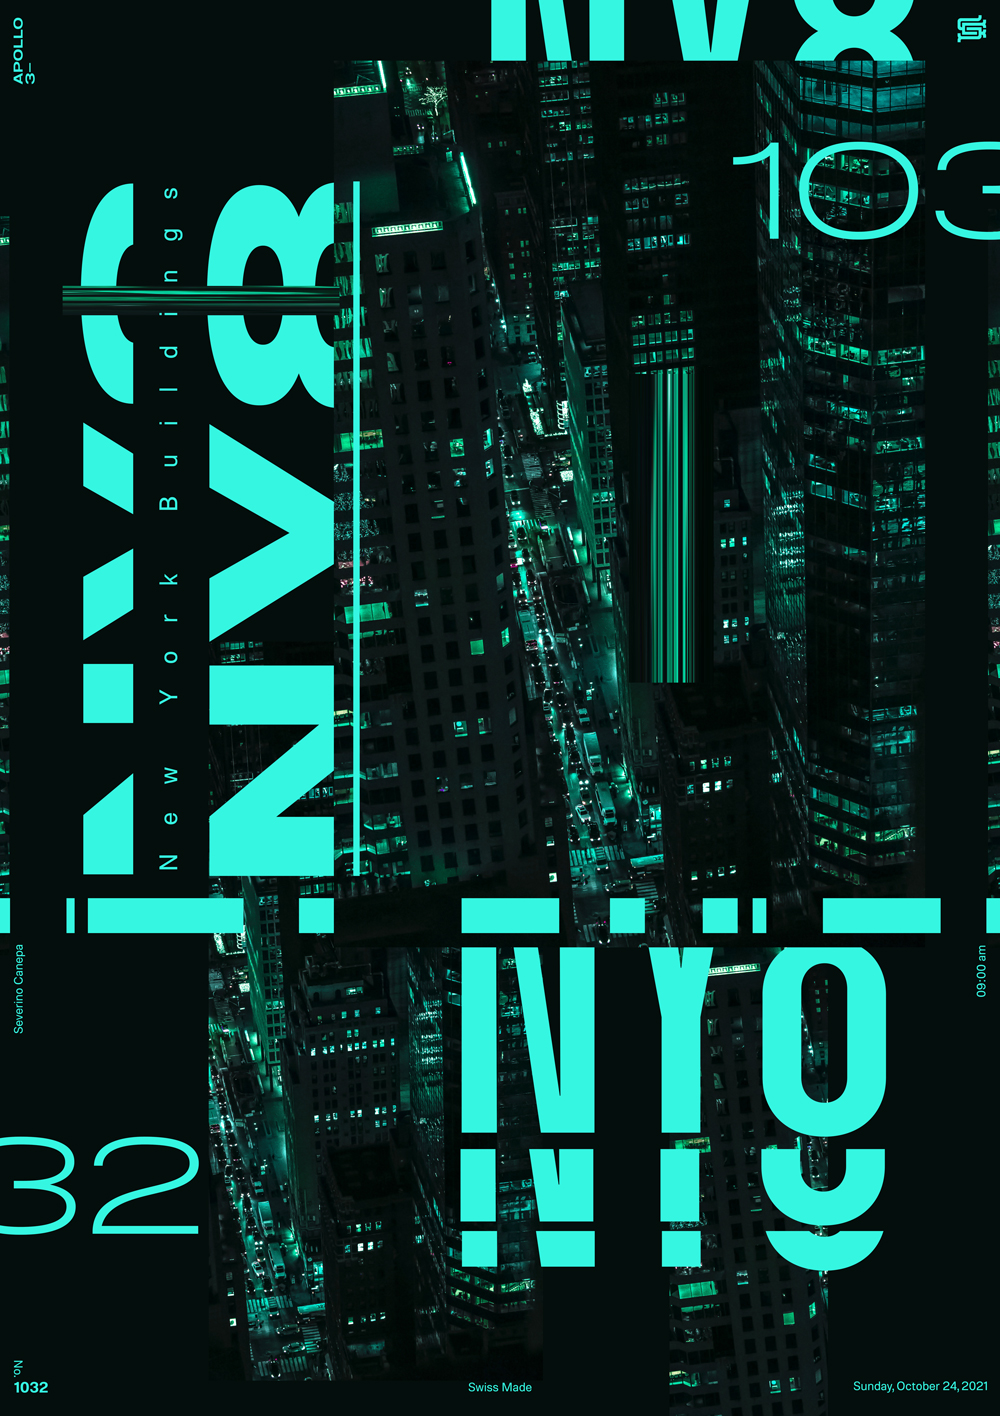 Digital creation I realized with the picture of New York's Building and typography